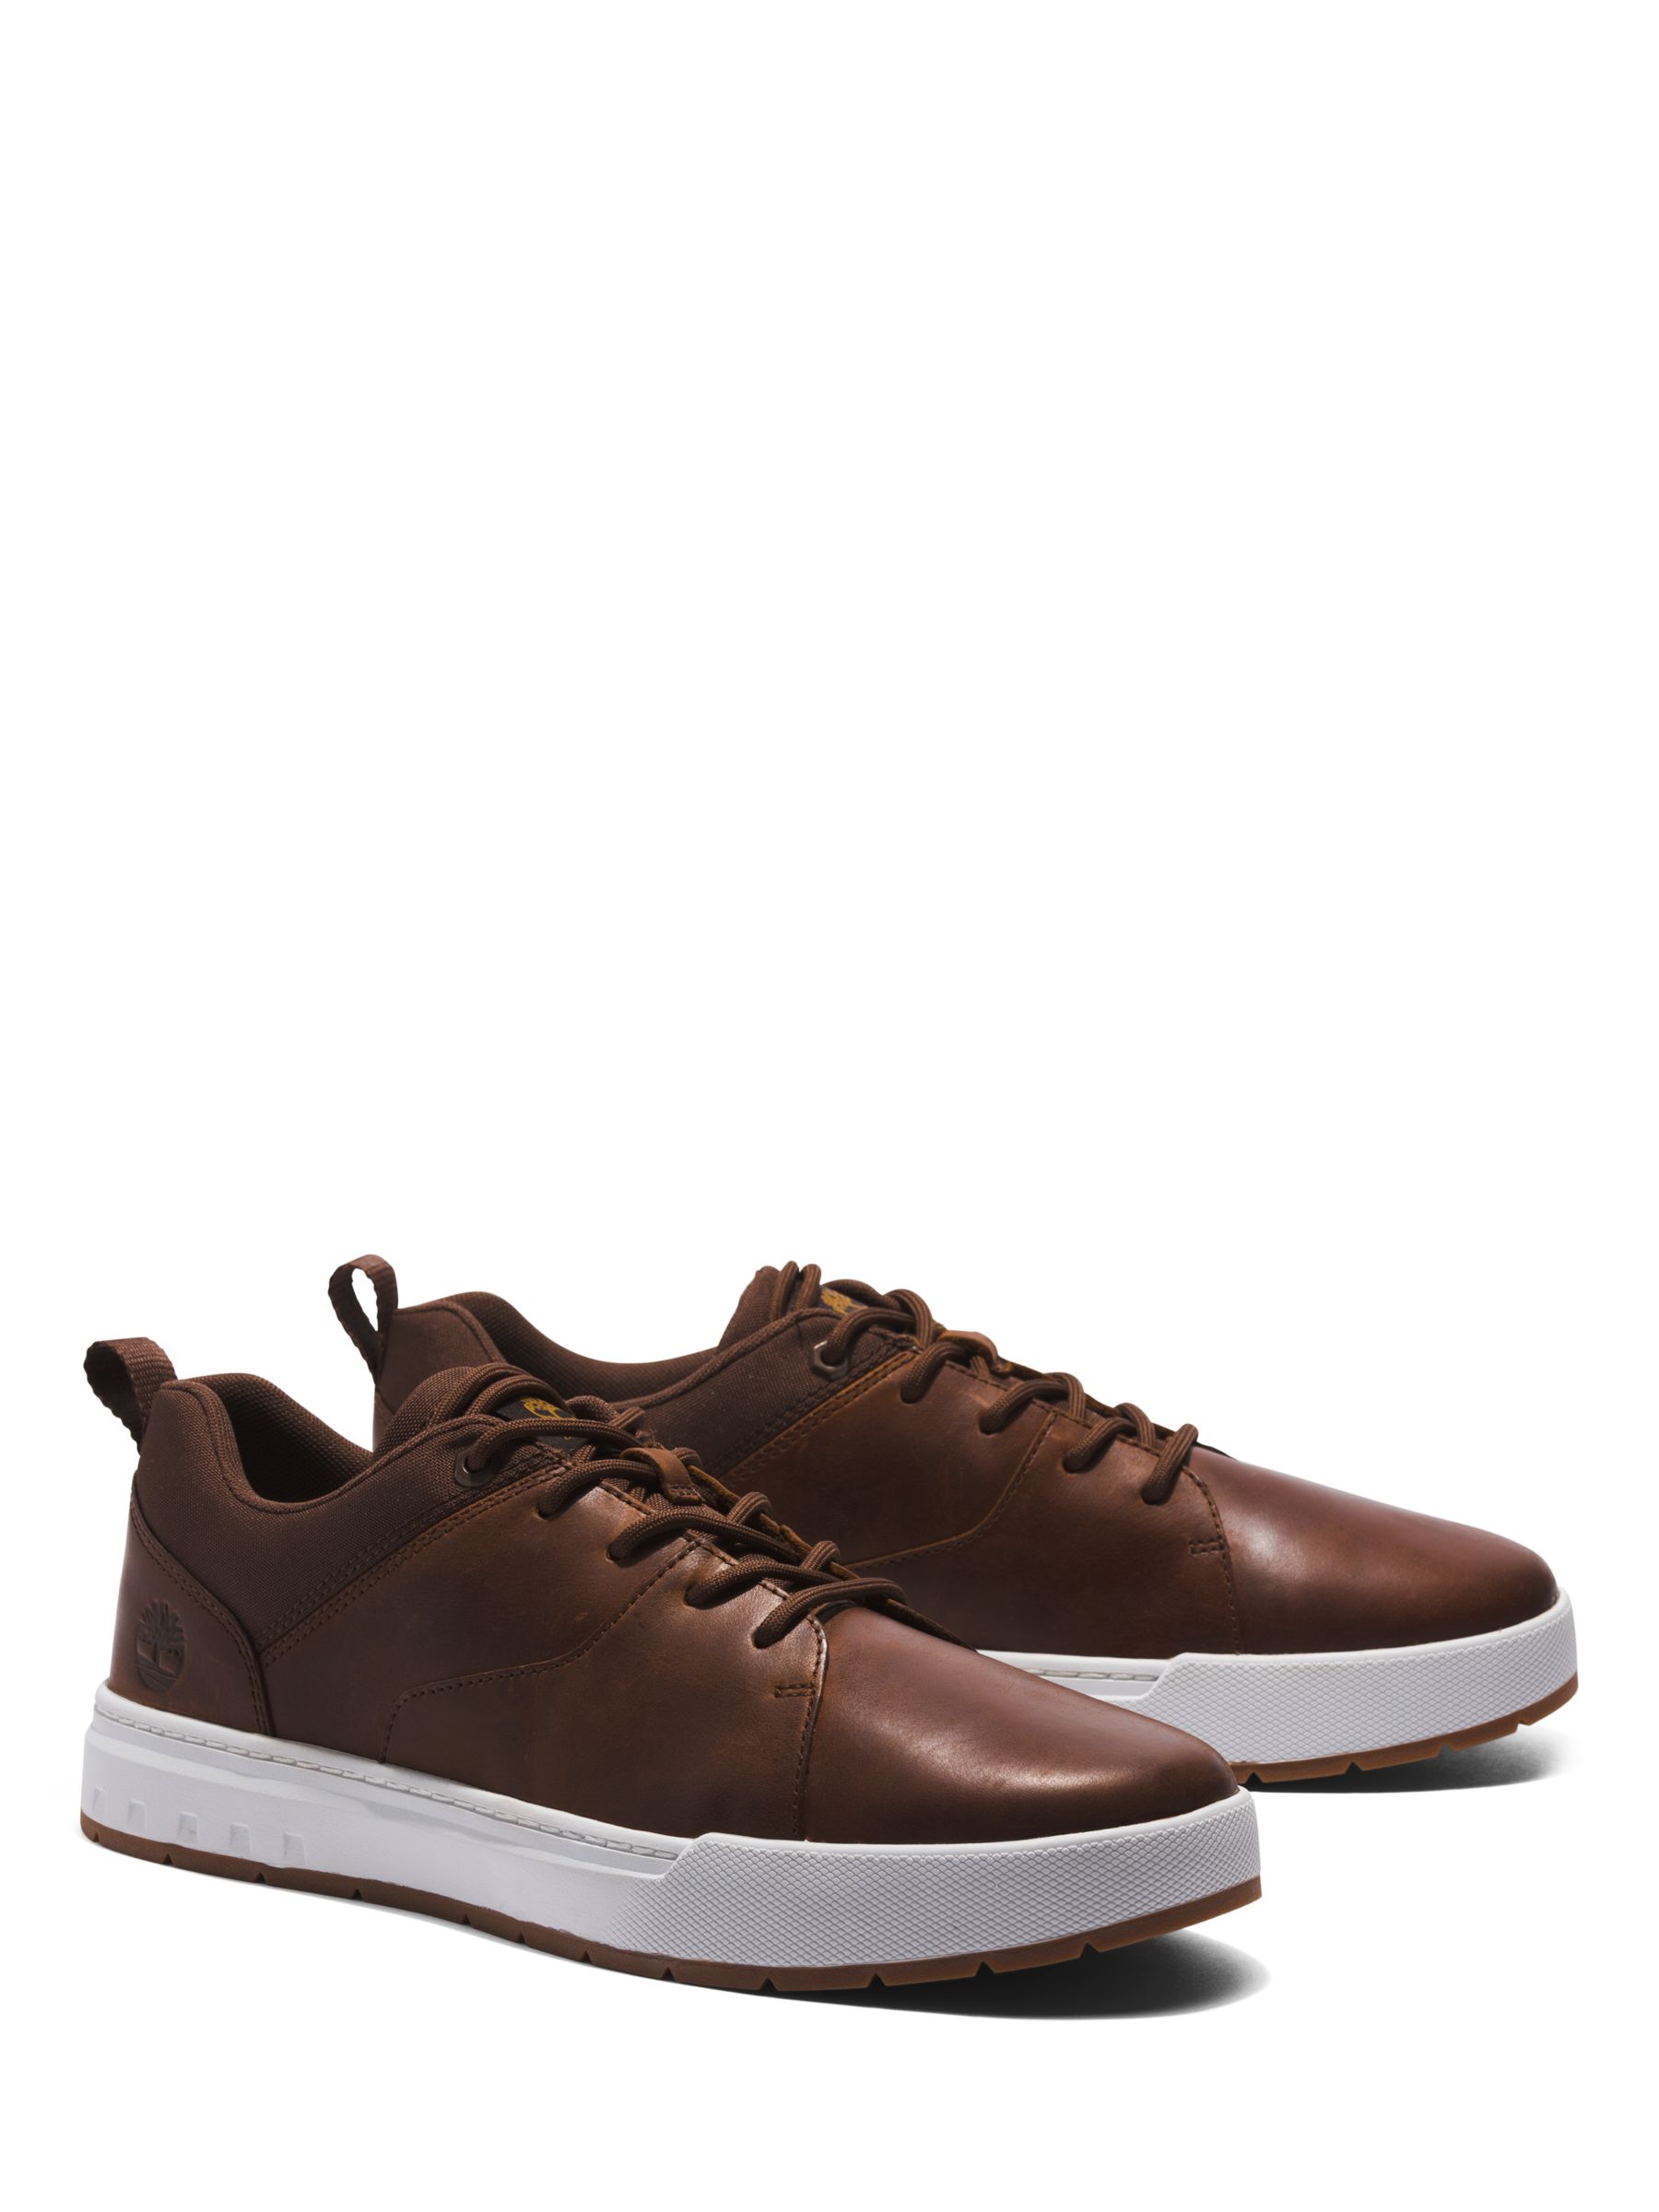 Buy Timberland Maple Grove Trainers Online at johnlewis.com